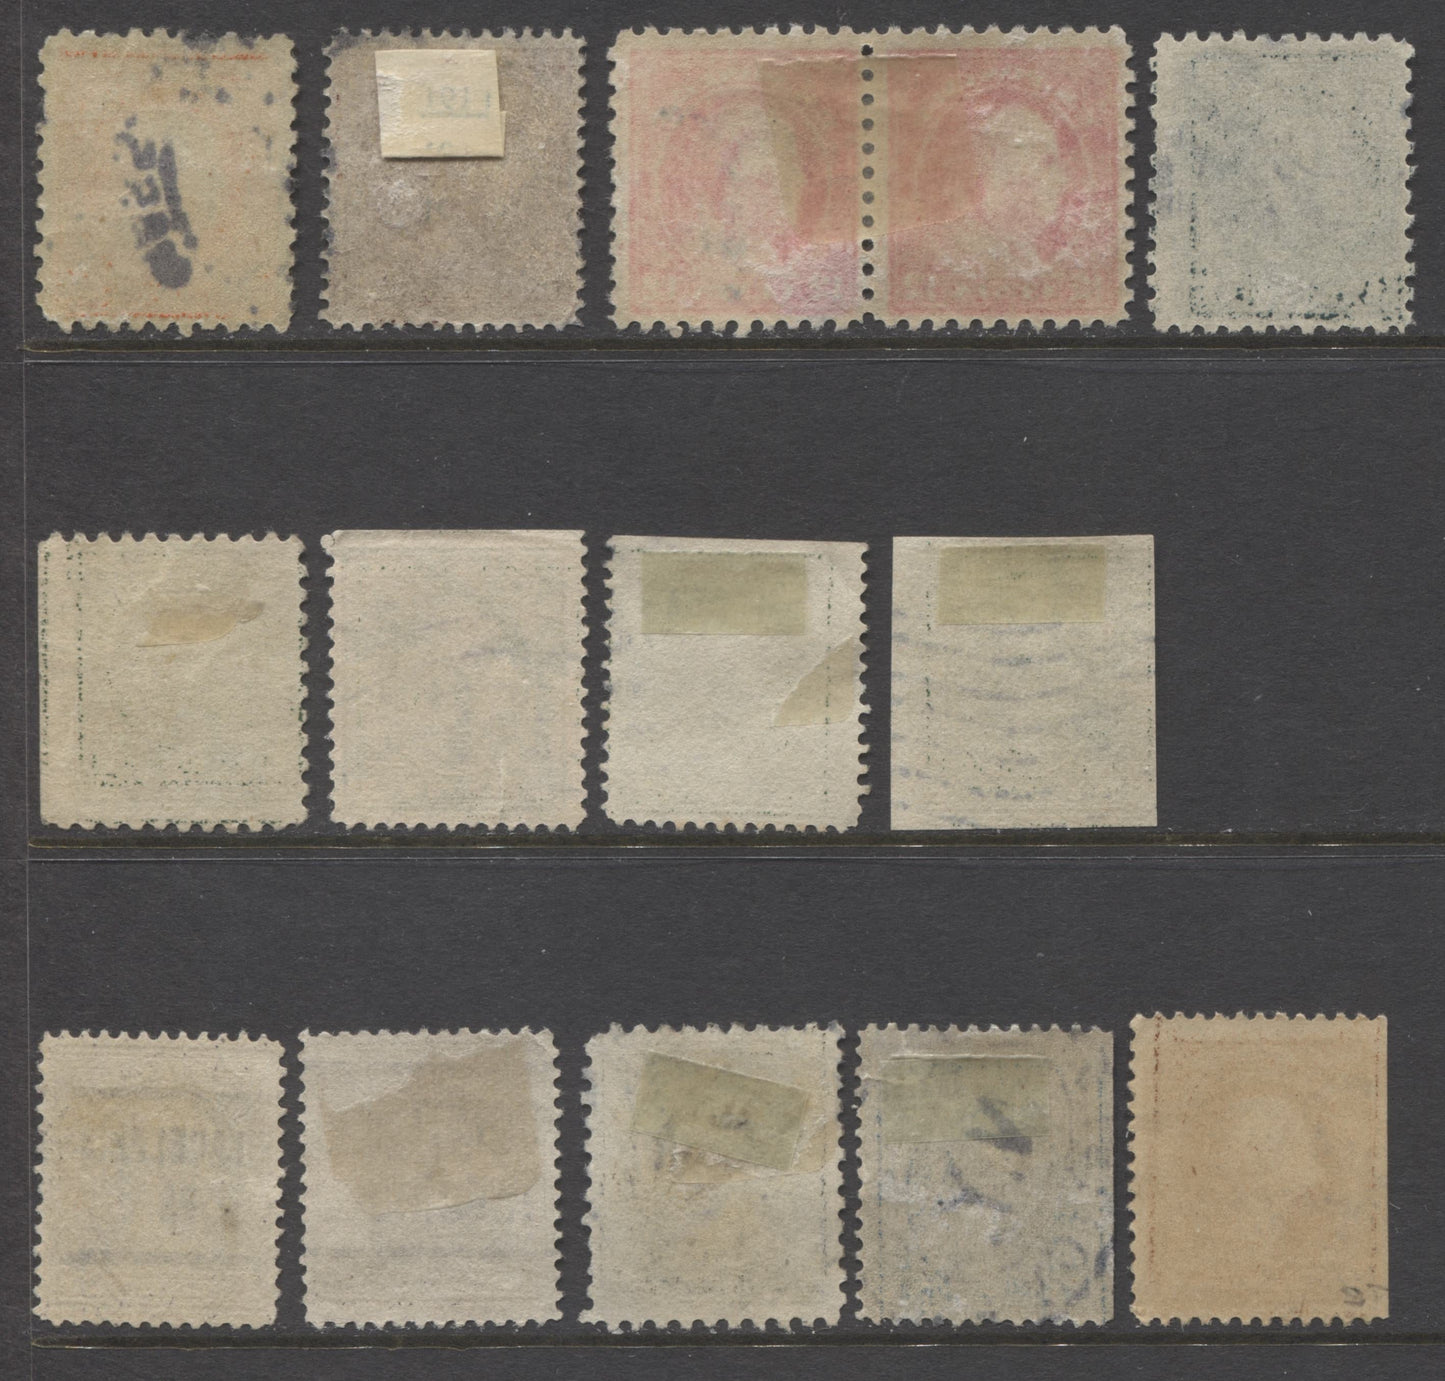 Lot 99 United States SC#377-378, 405, 408, 418, 424, 430, 434-435, 439, 1910-1915 Washington-Franklin Issue, 14 Fine Used Examples, Watermarked, Multiple Perfs. 2022 Scott Classic Catalogue $60.25 USD, Click on Listing to See ALL Pictures